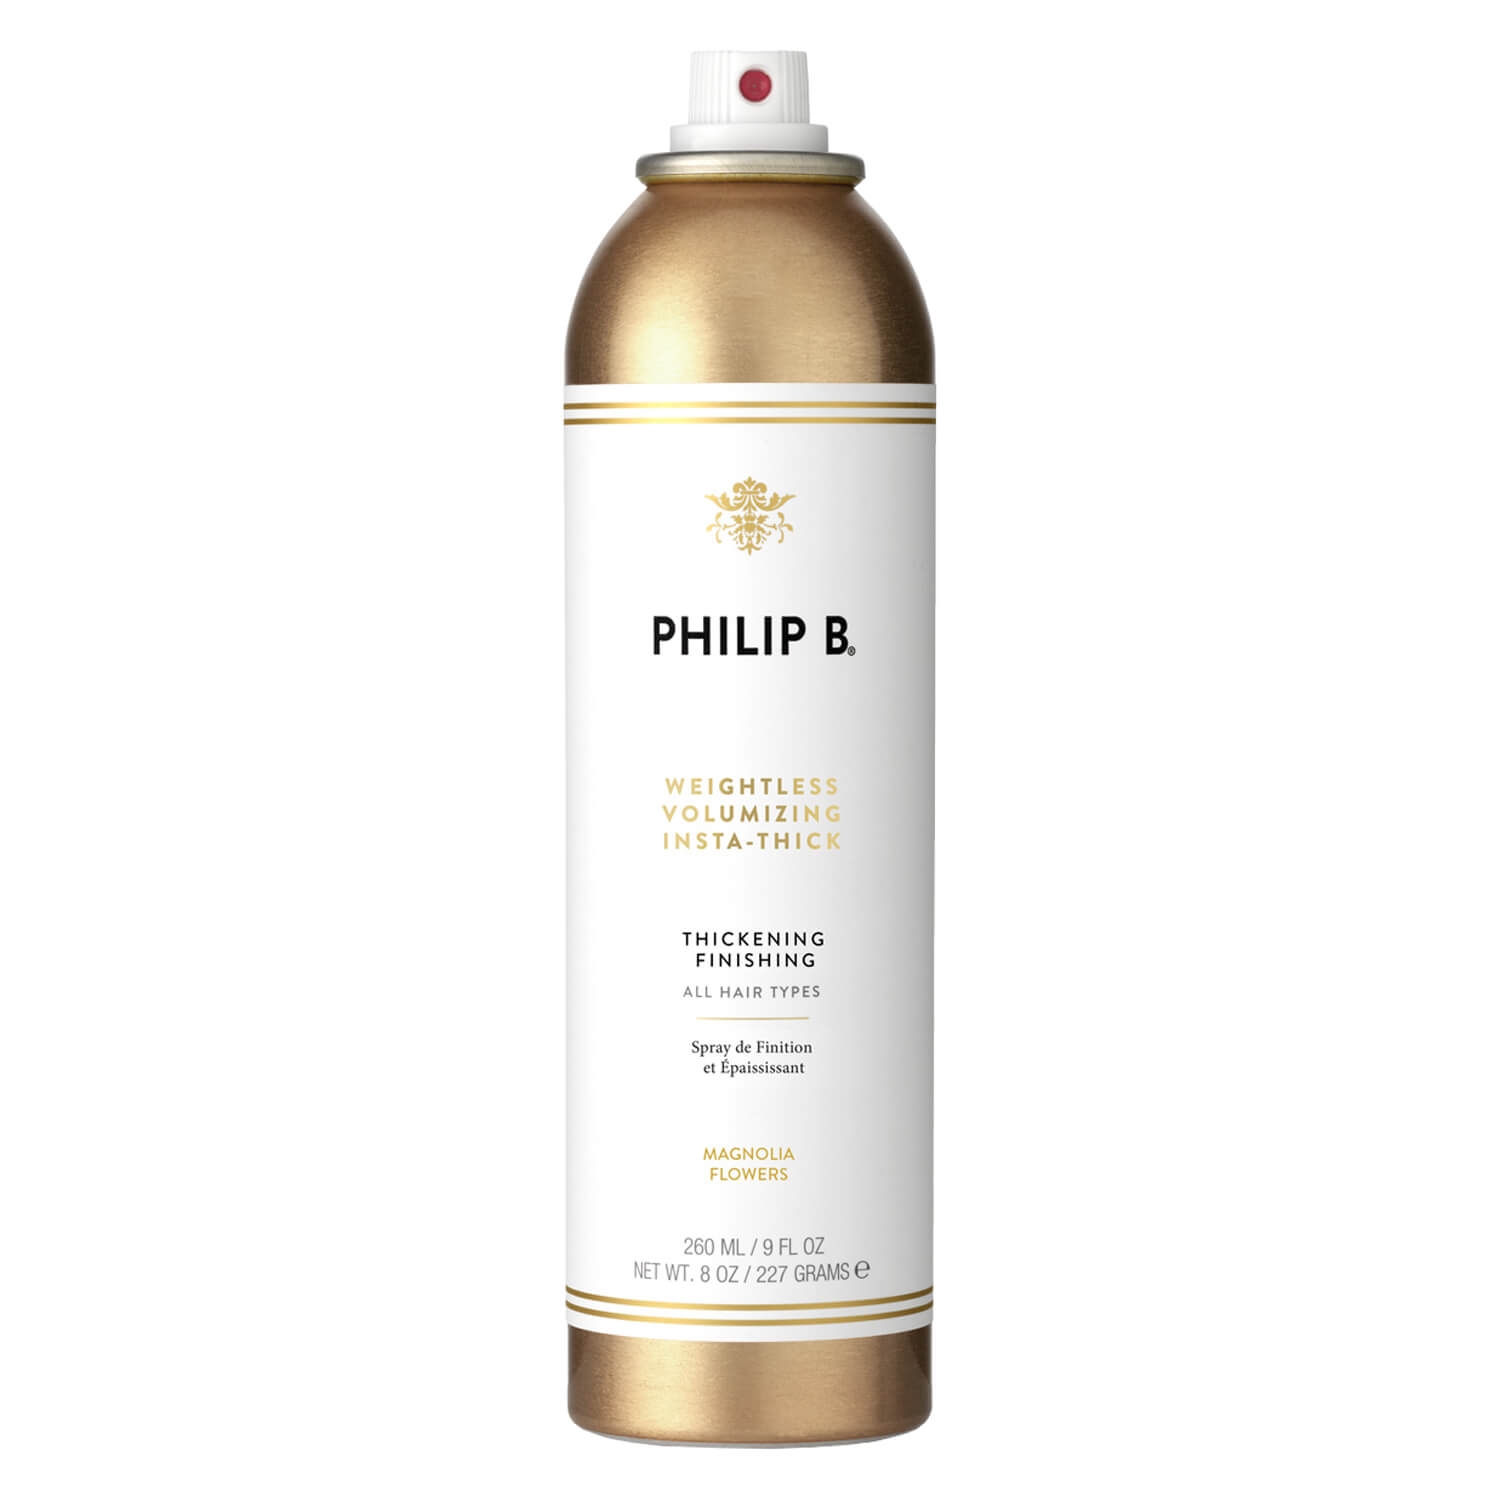 Product image from Philip B - Weightless Volumizing Insta-Thick